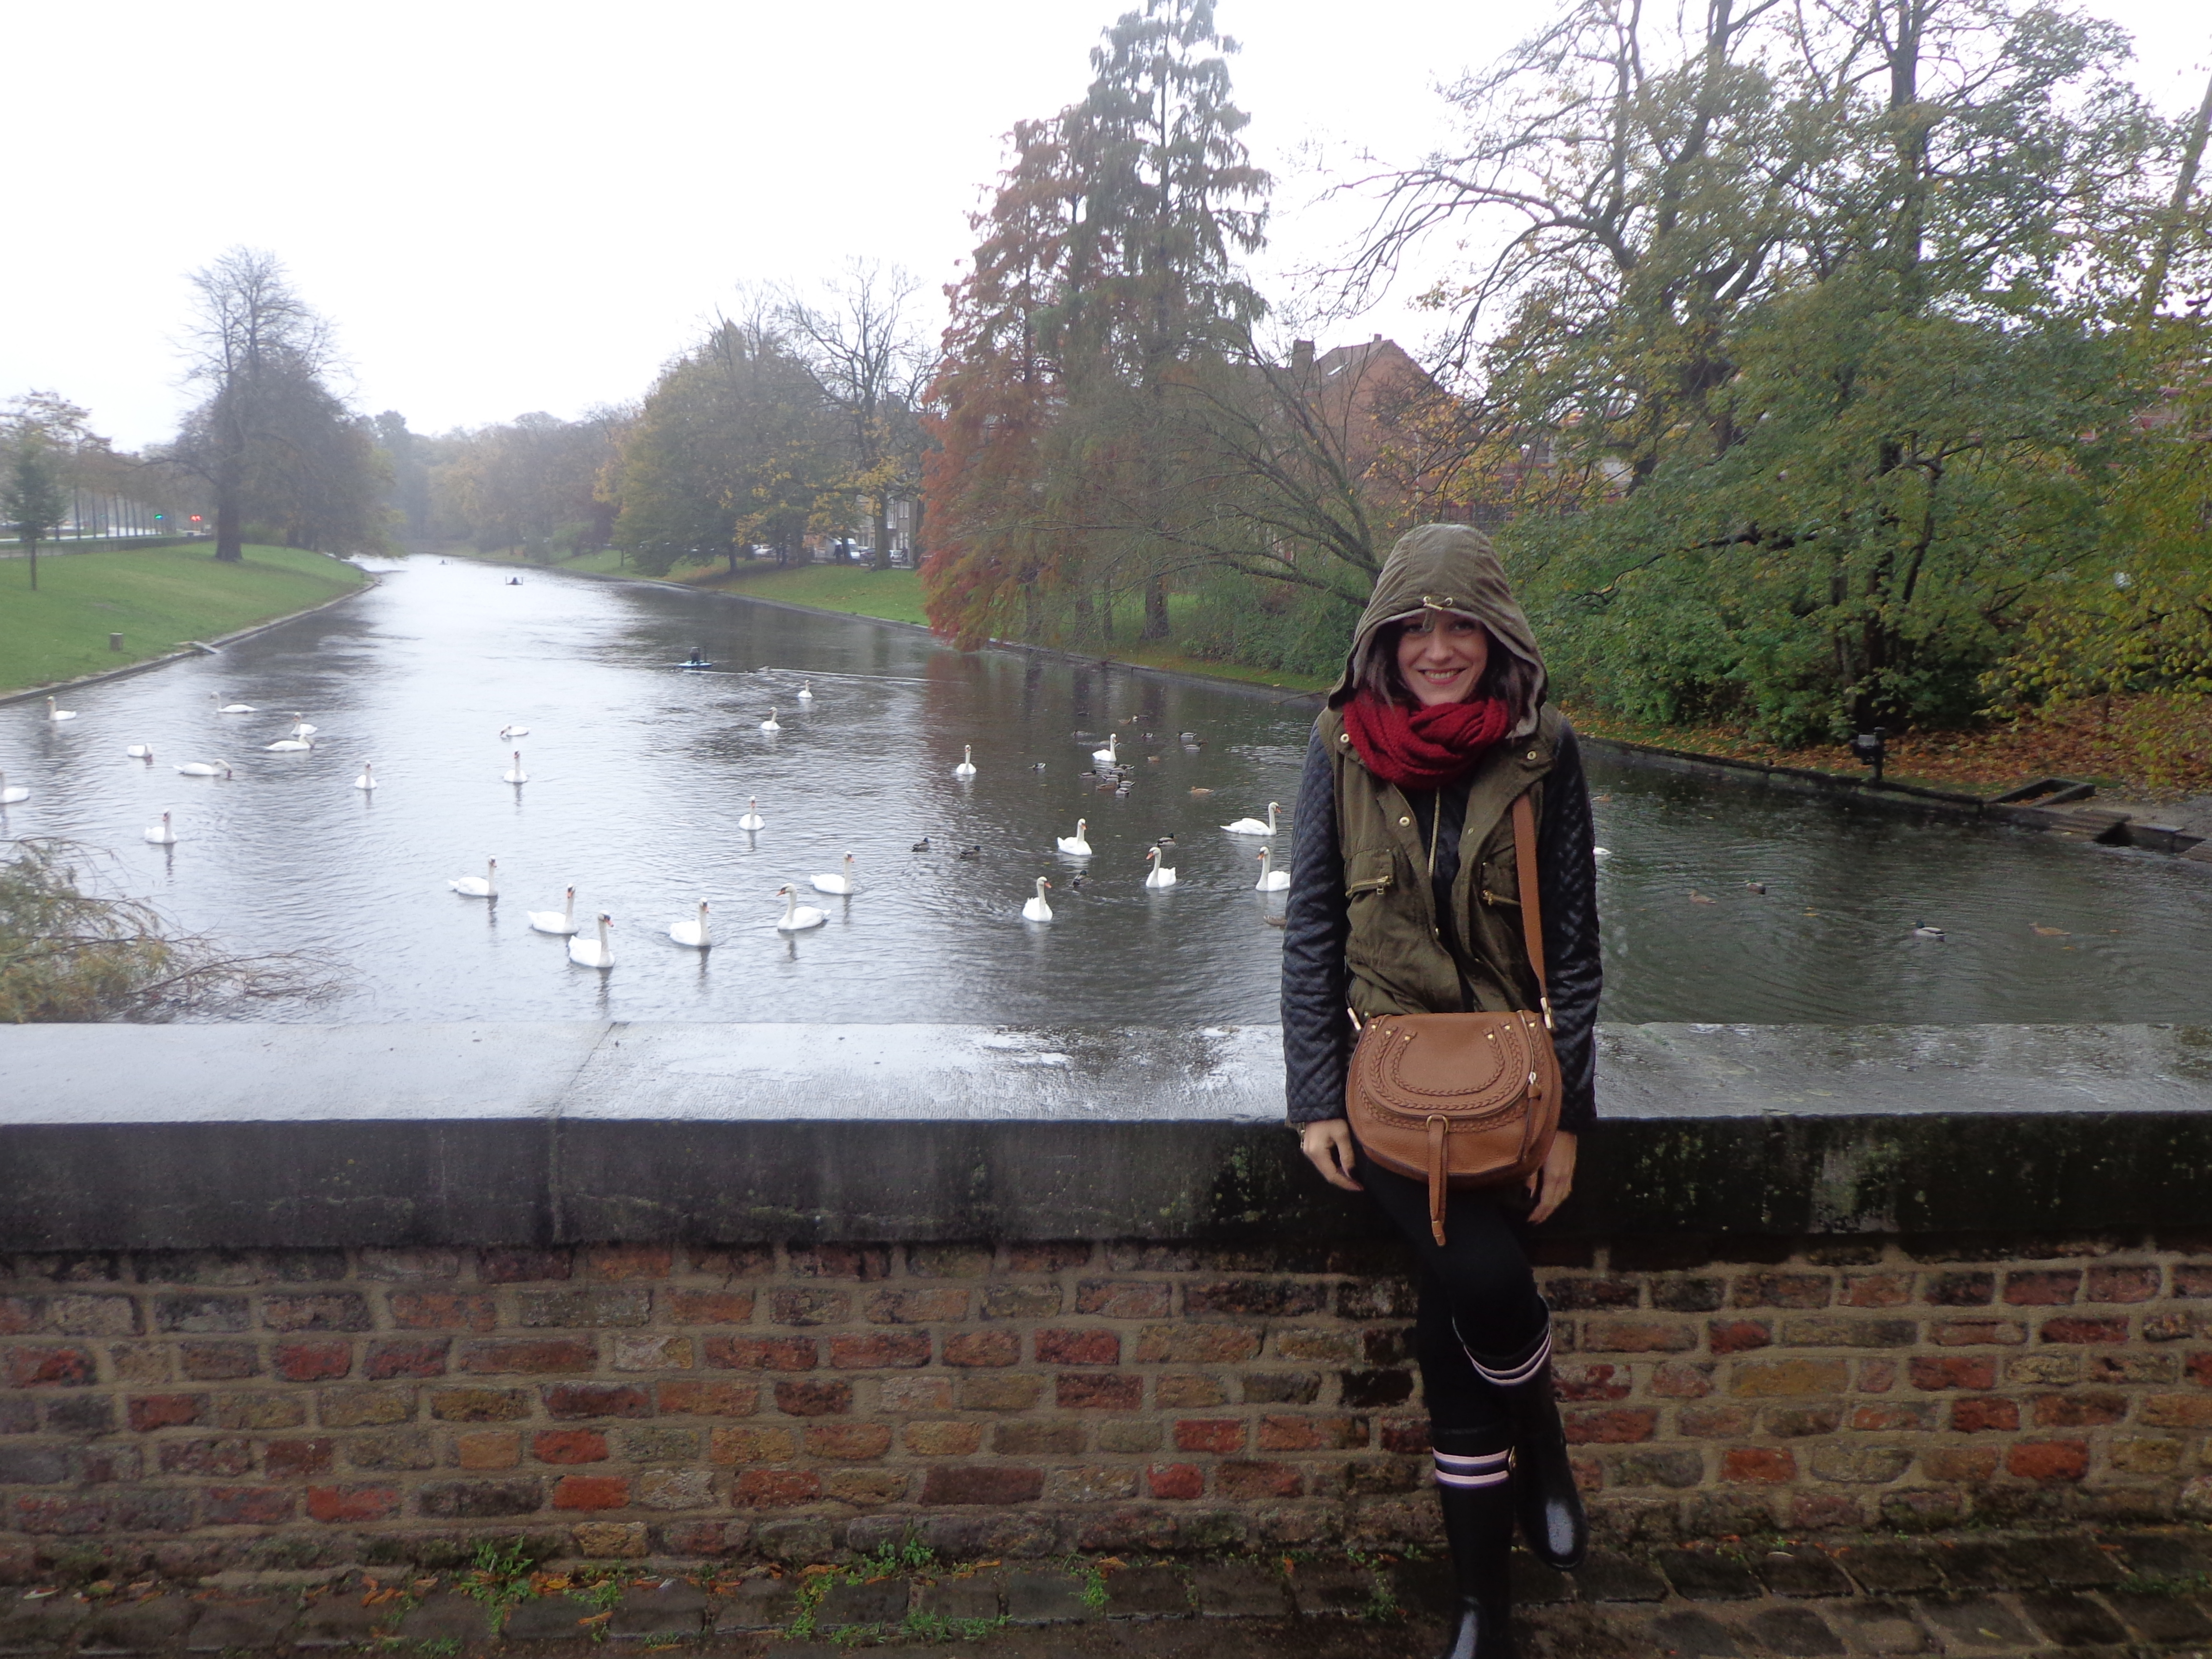 Brugge! Yes, it was a bit cold!